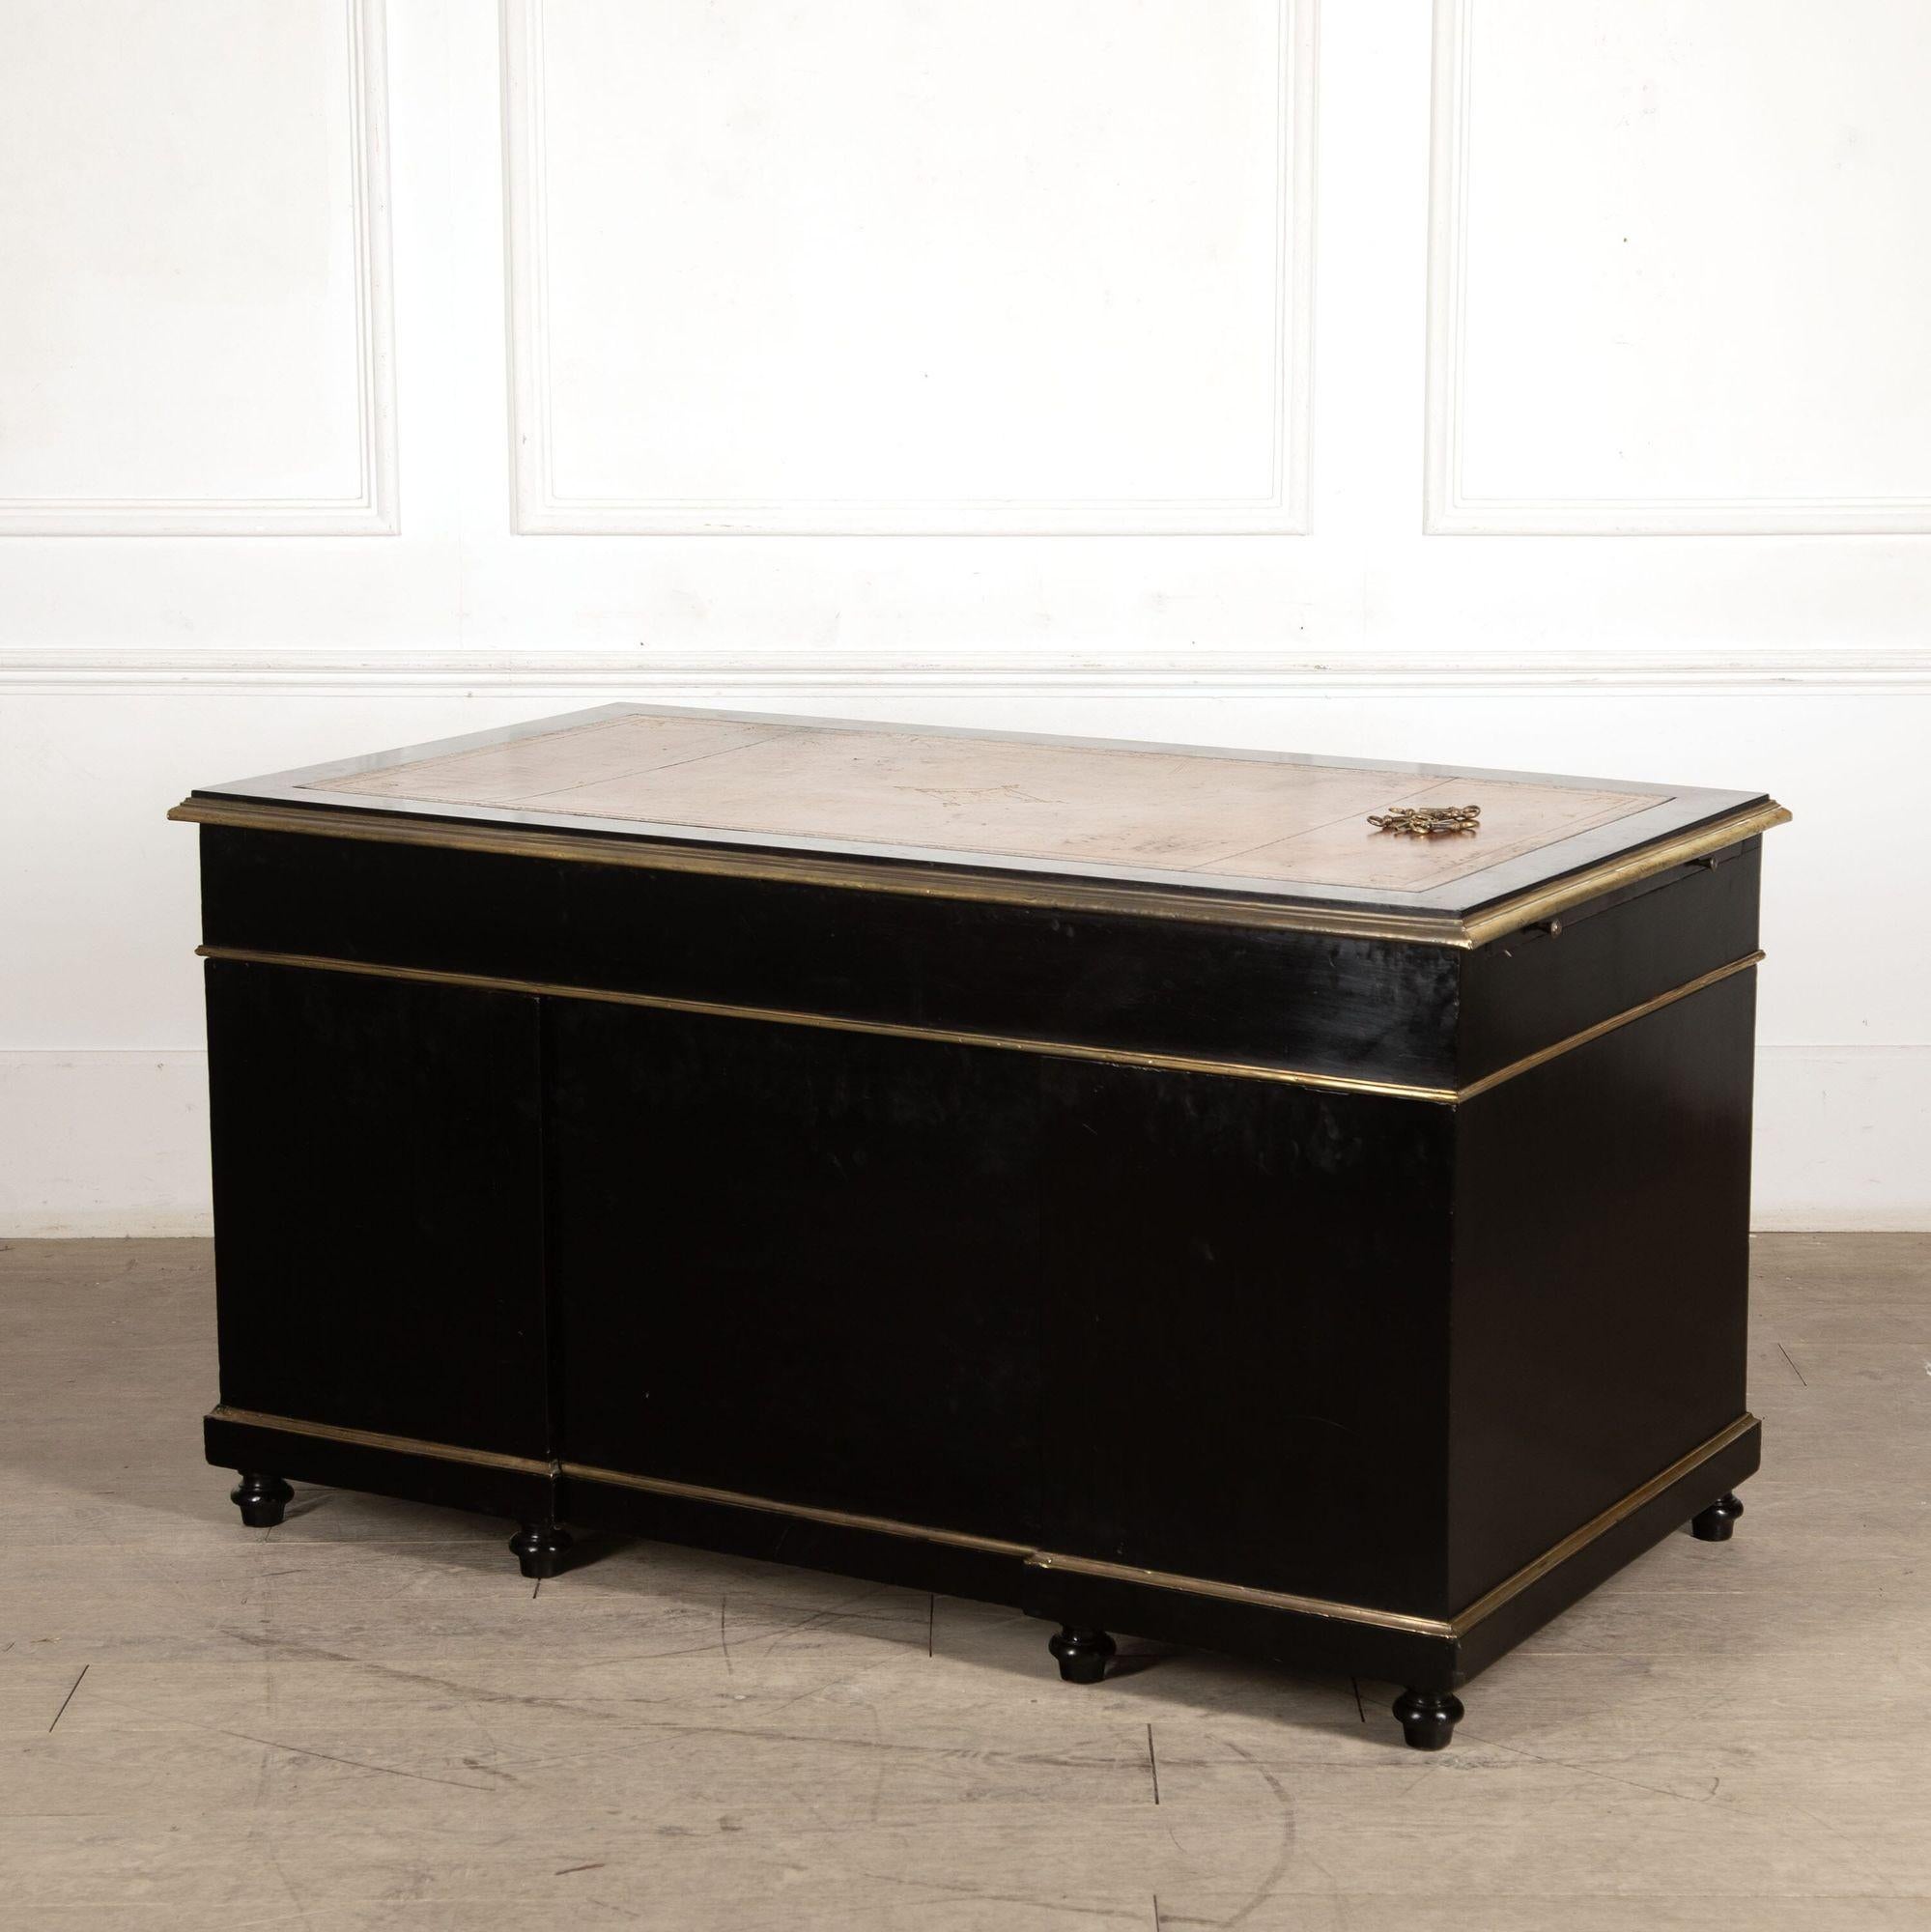 Quality 19th century French ebonized and brass mounted pedestal desk with original inset leather.
circa 1890.